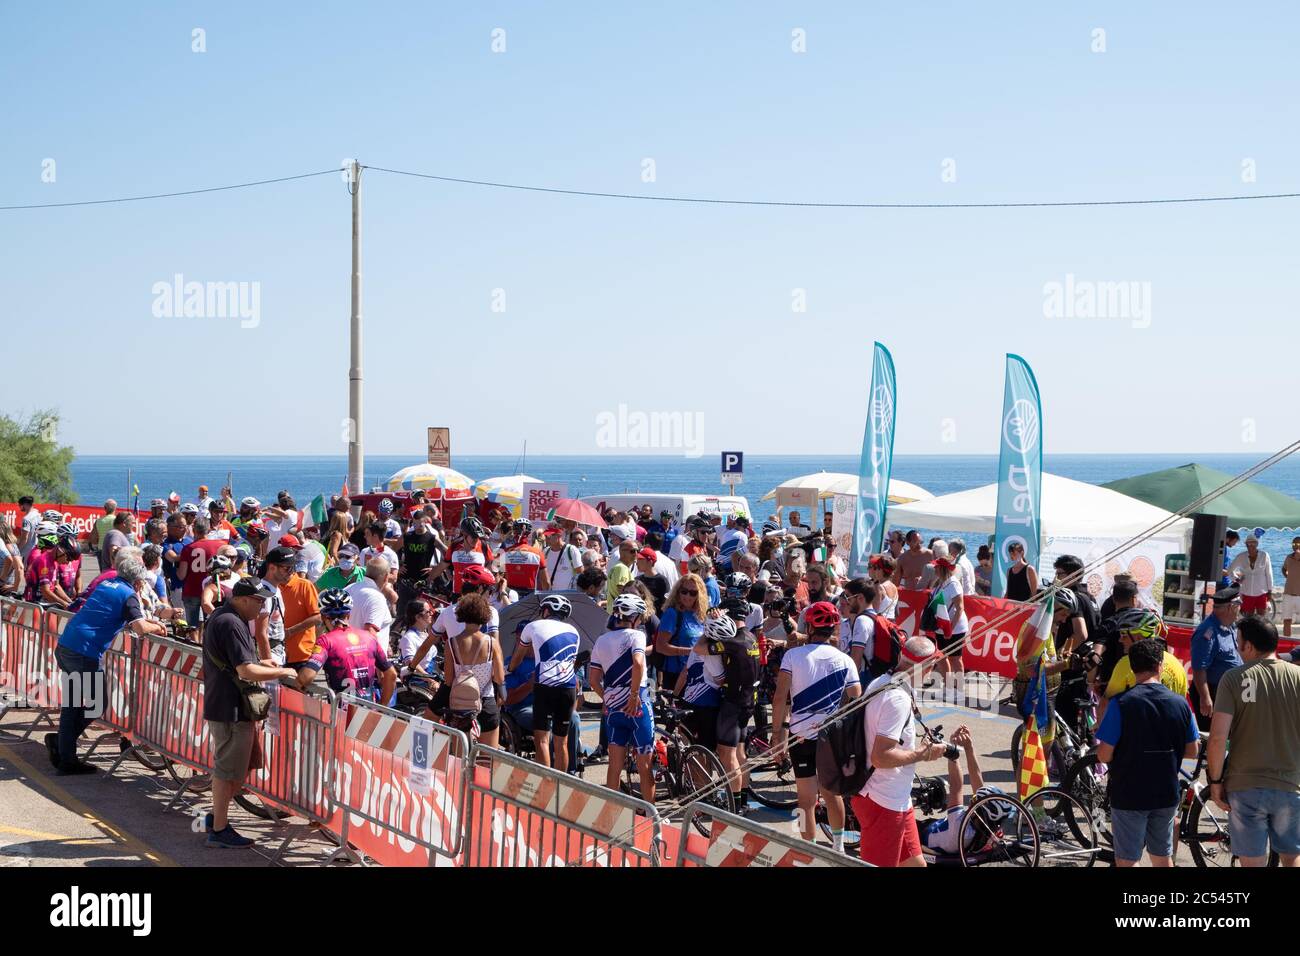 June 28, 2020, S.Maria di Leuca, South Italy, public celebrates the participants of the last stage of the relay Tricolore wanted by Alex Zanardi. Stock Photo